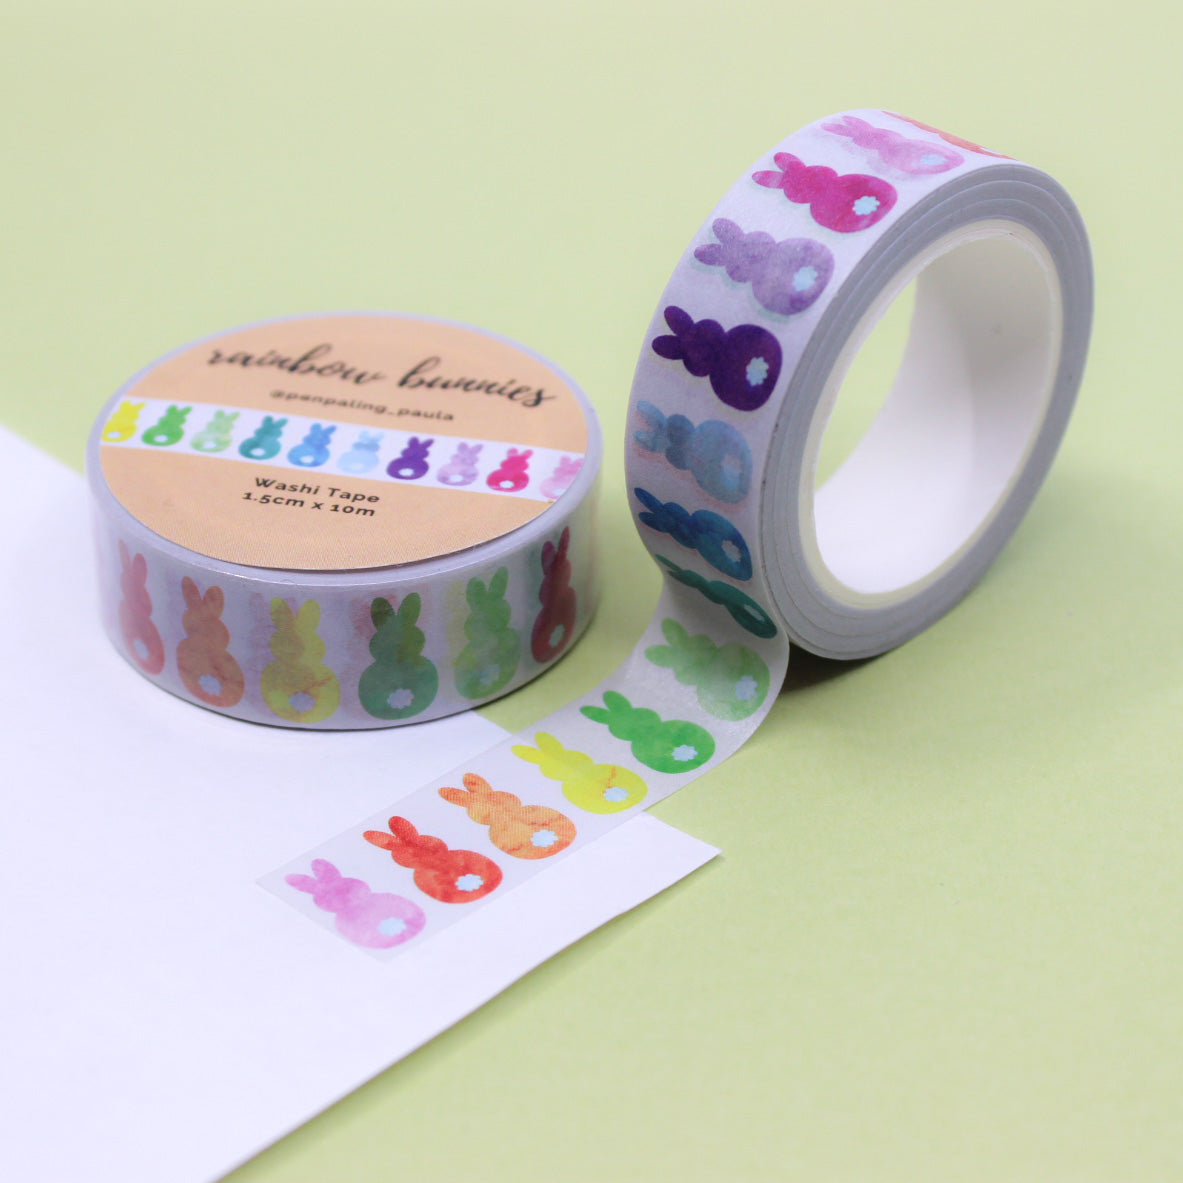 Easter Bunny Bottoms Washi Tape: Playful and charming tape featuring cute bunny bottoms, perfect for Easter crafts and decorations. This tape is designed by Penpaling paula and sold at BBB Supplies Craft Shop.